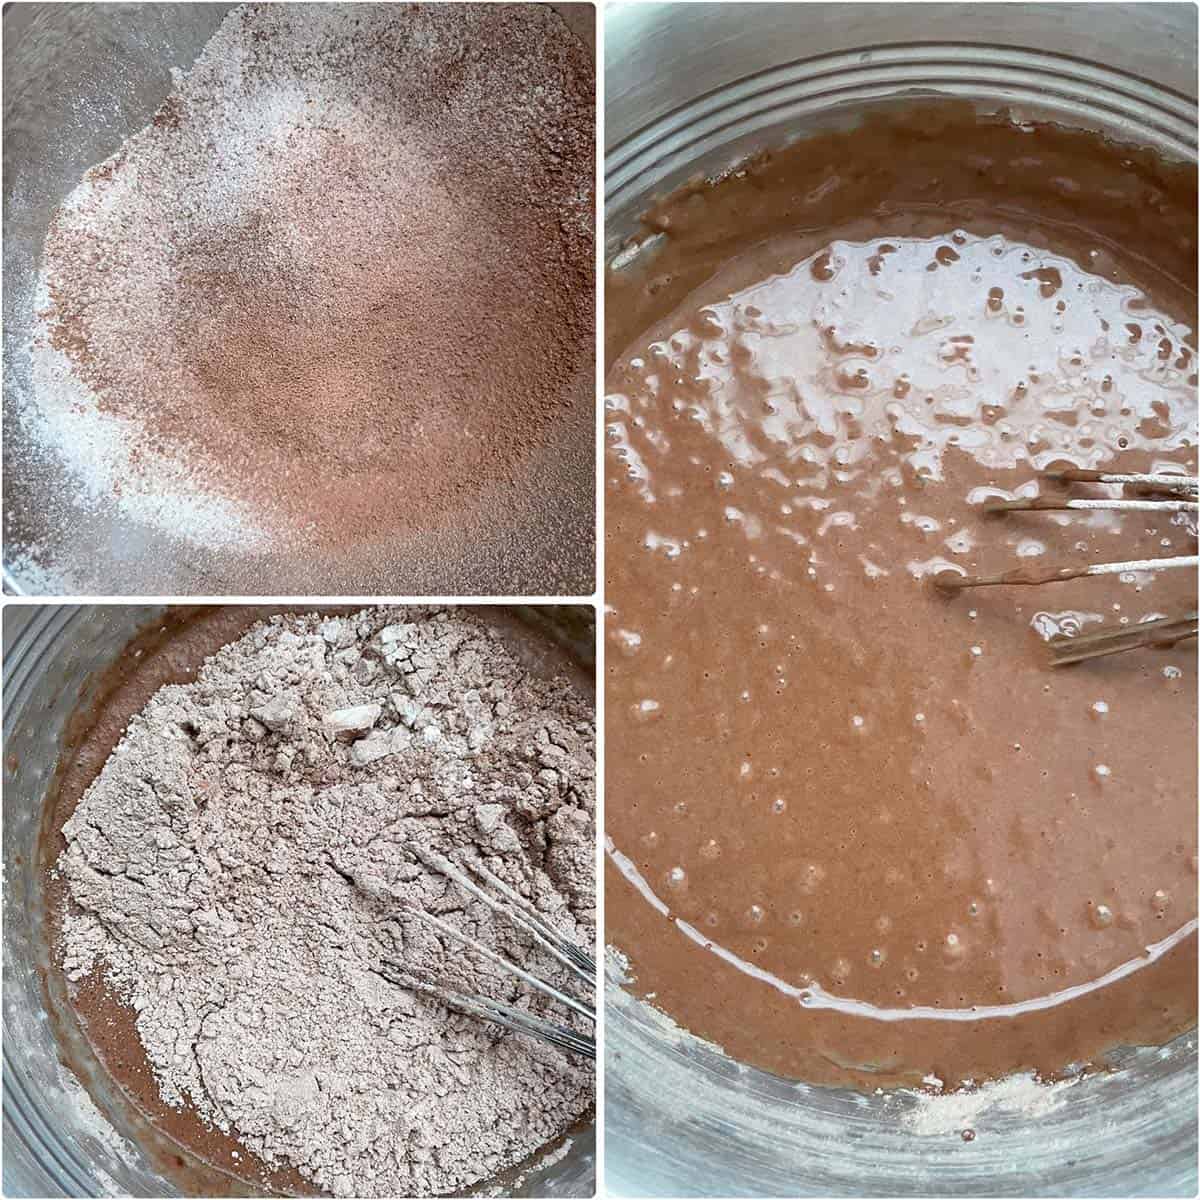 3 panel photo showing the adding of dry ingredients to wet ingredients.